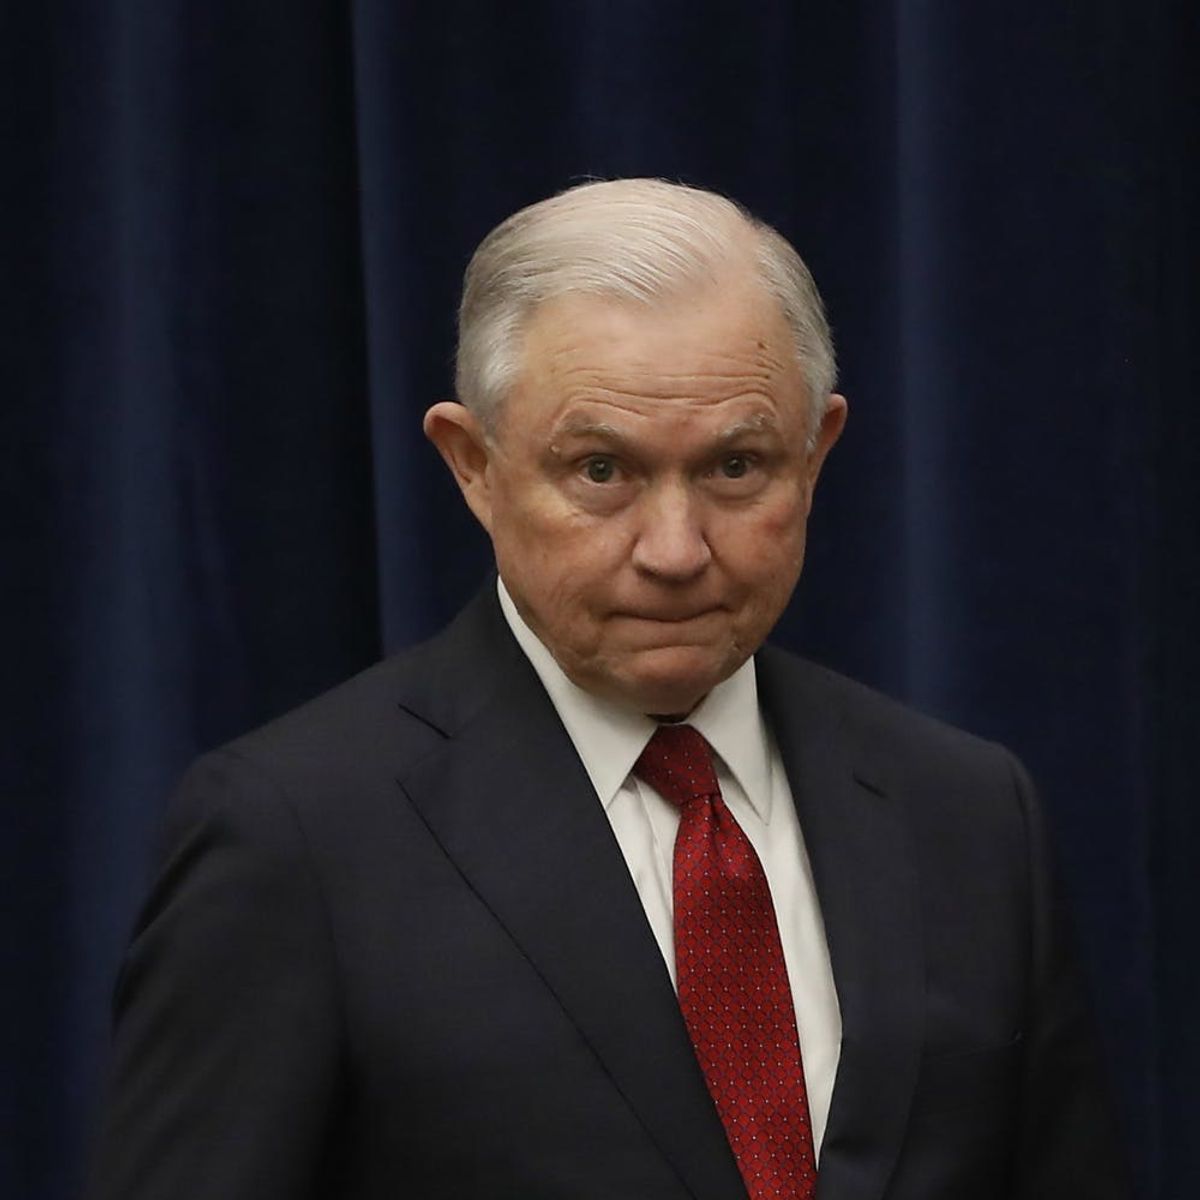 The Department of Justice Is Suing California Over the State’s Sanctuary Laws